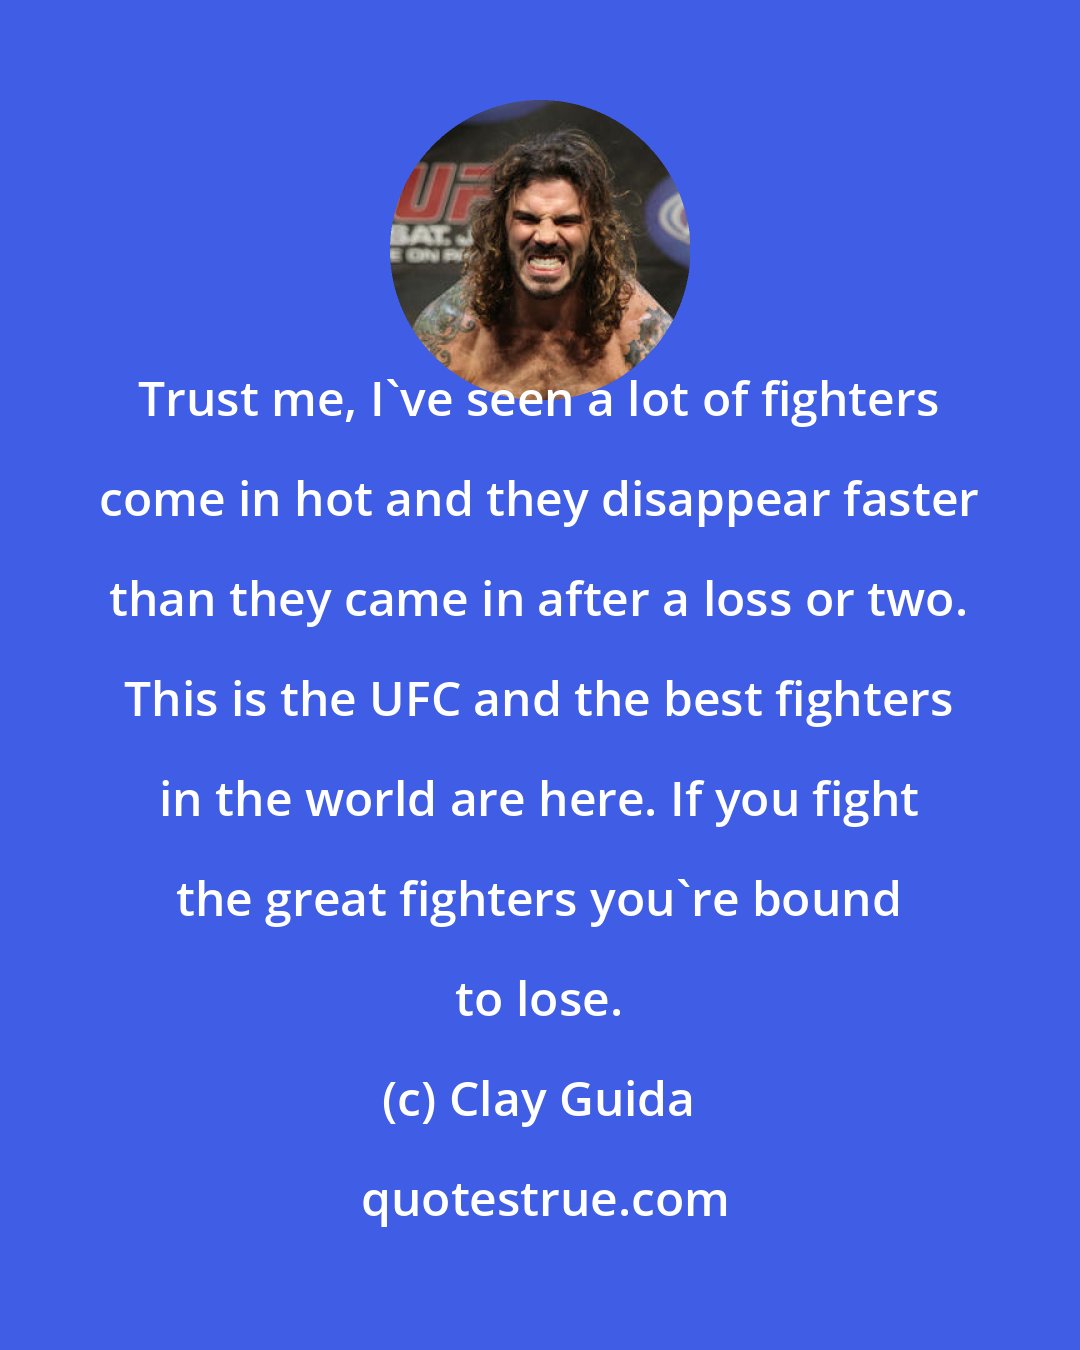 Clay Guida: Trust me, I've seen a lot of fighters come in hot and they disappear faster than they came in after a loss or two. This is the UFC and the best fighters in the world are here. If you fight the great fighters you're bound to lose.